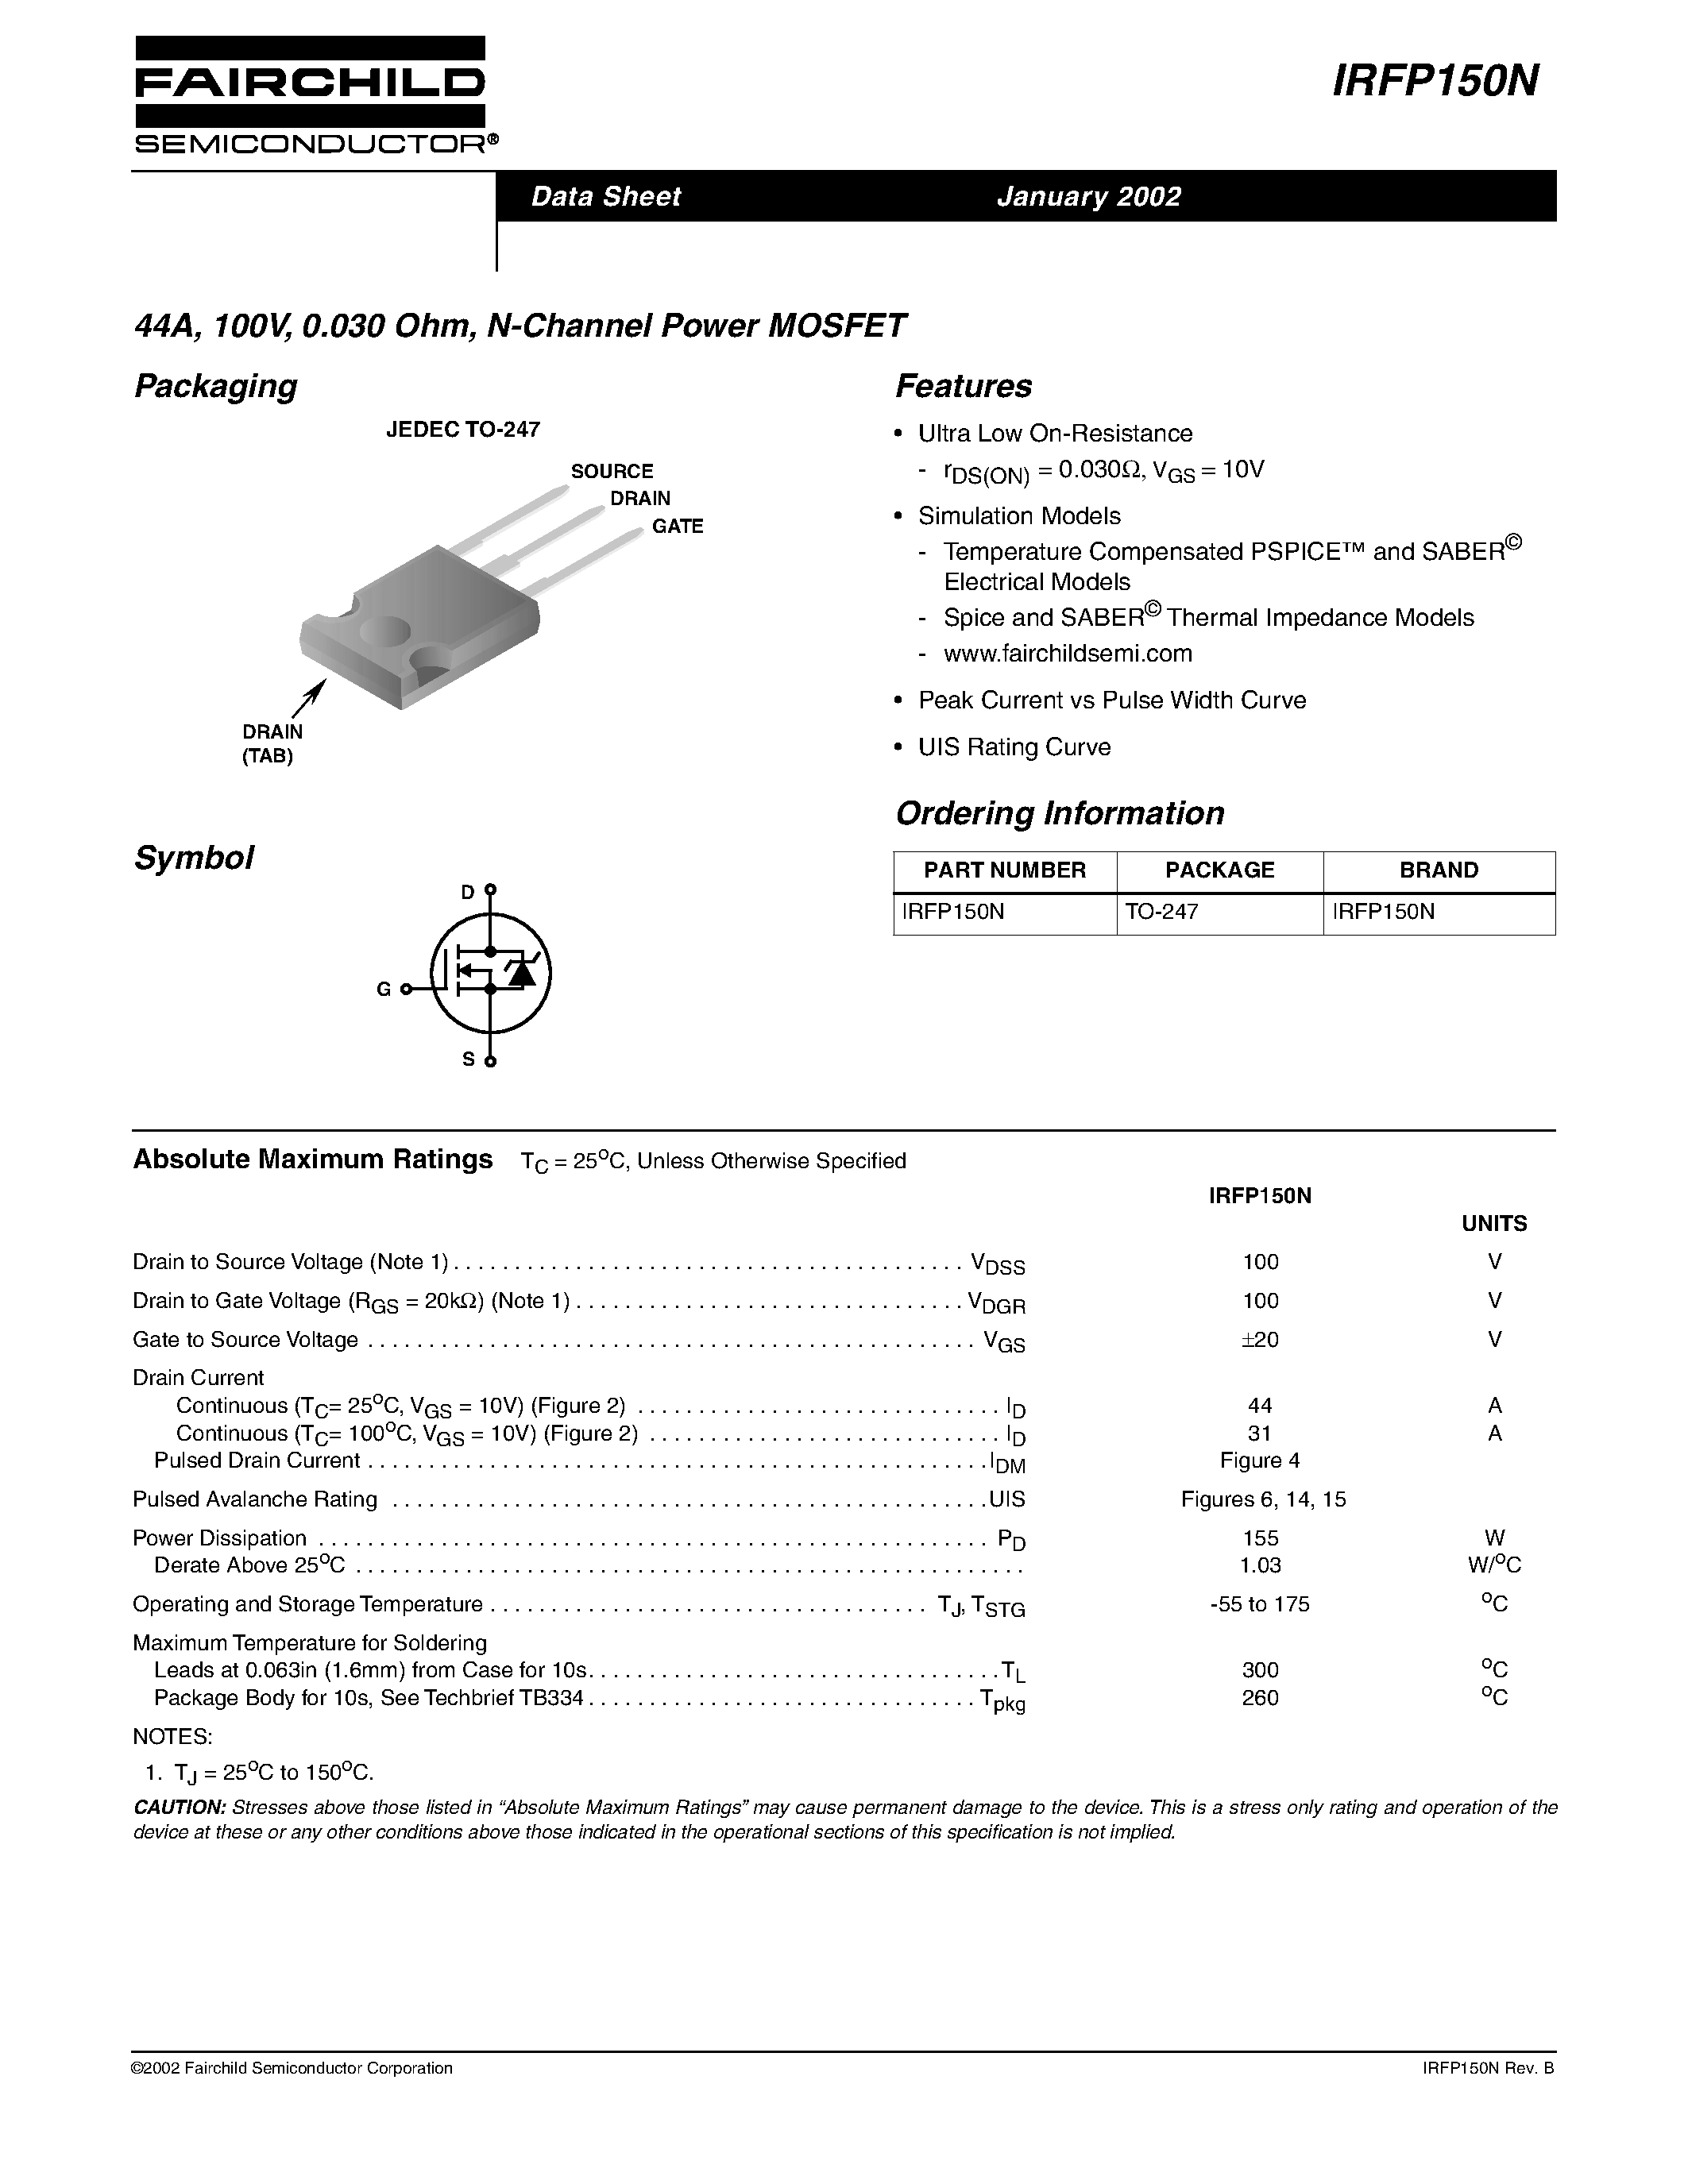 Datasheet IRFP150N - N-Channel Power MOSFET page 1